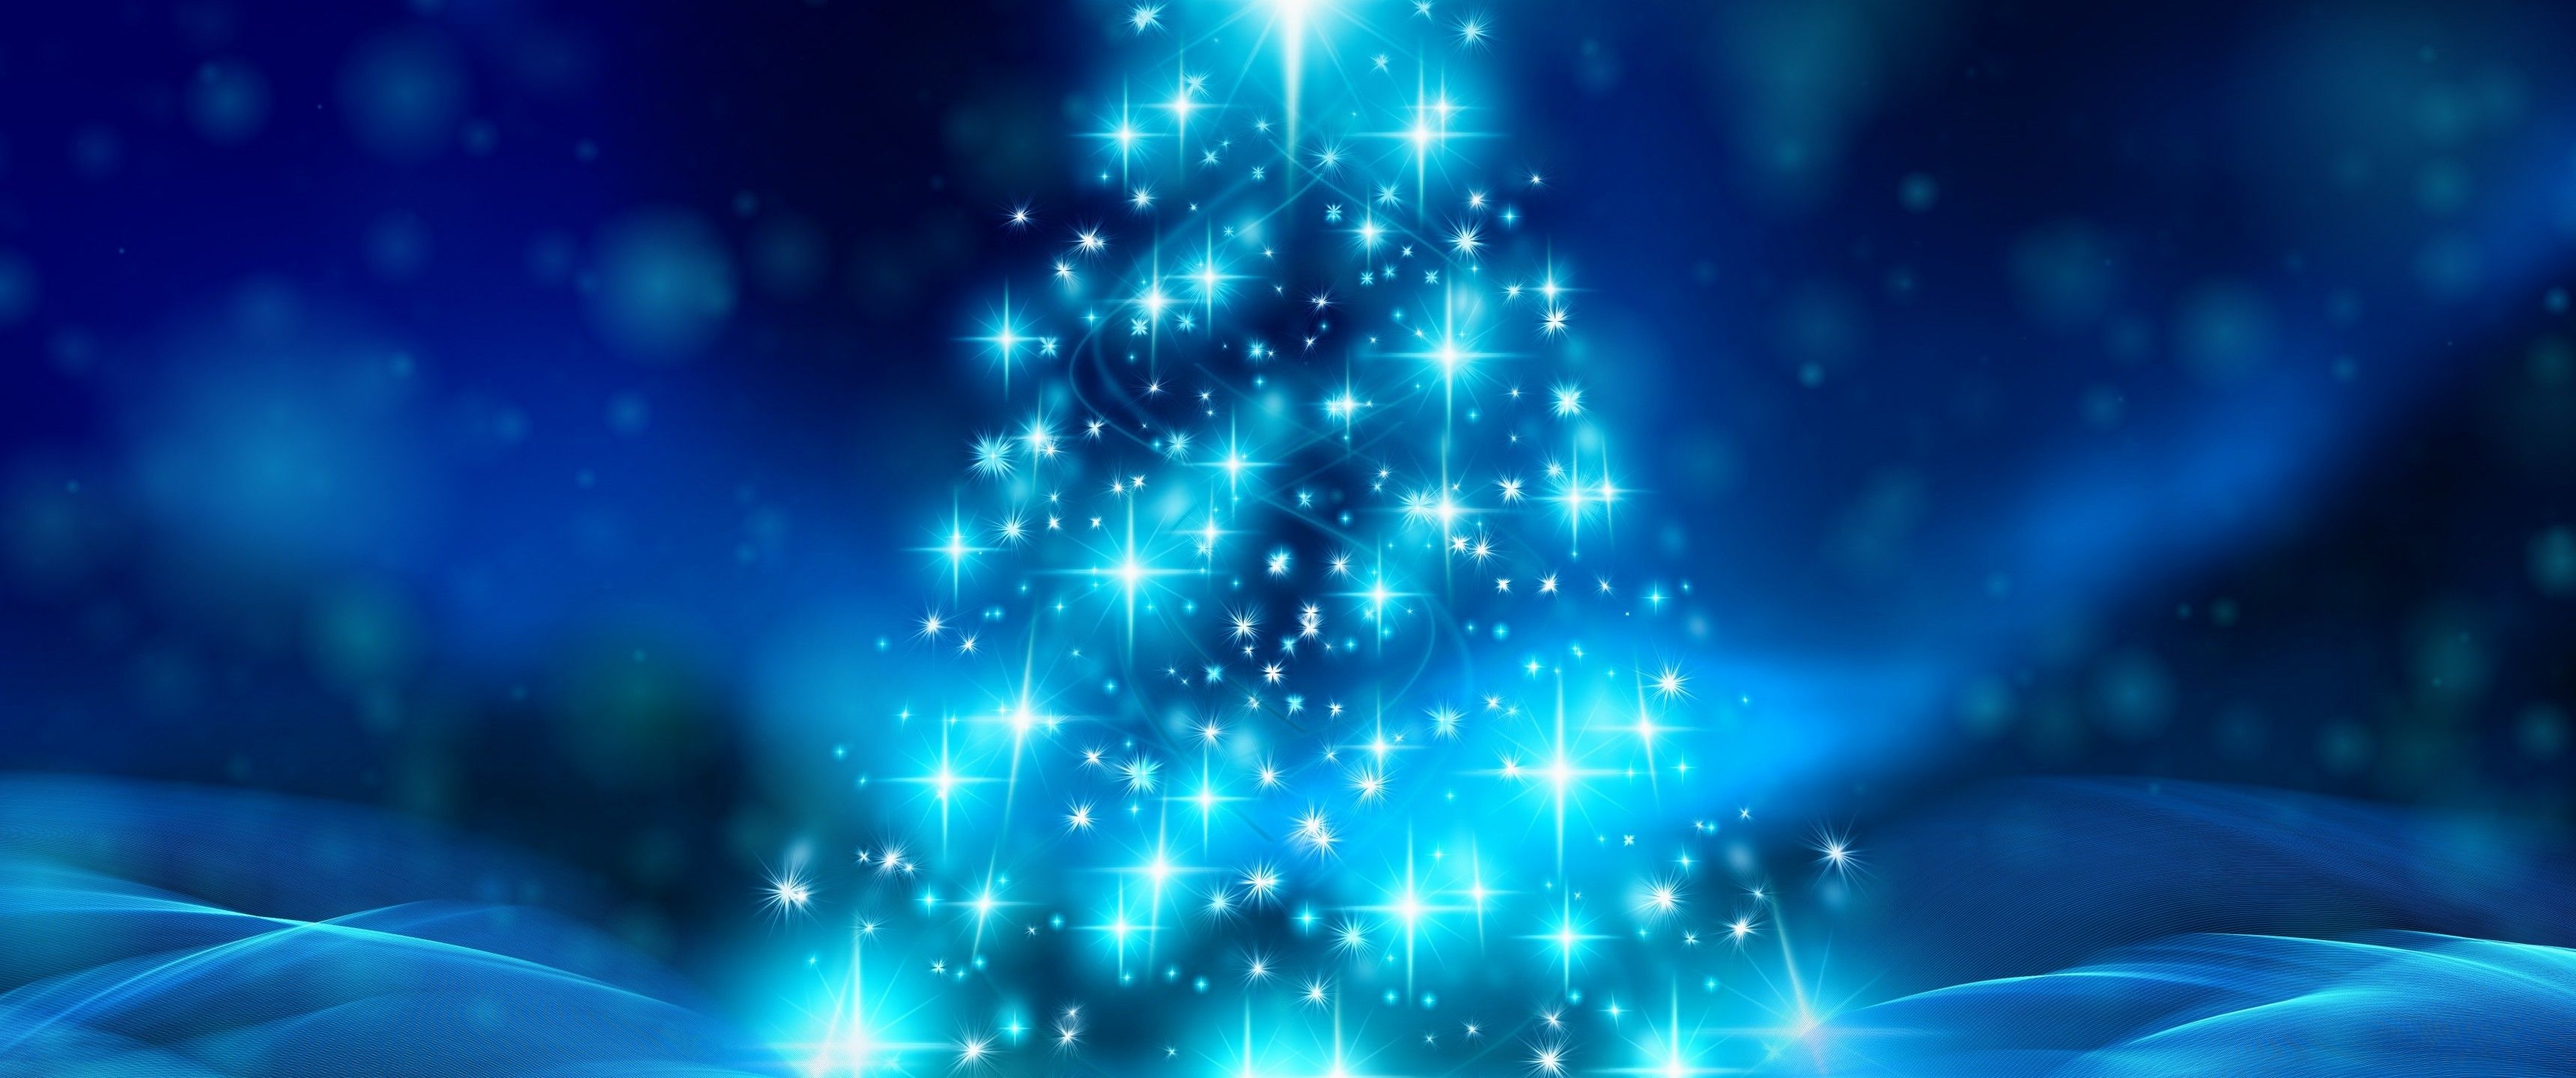 Download 3440x1440 Blue Christmas Tree, Happy New Year 2019 Wallpaper